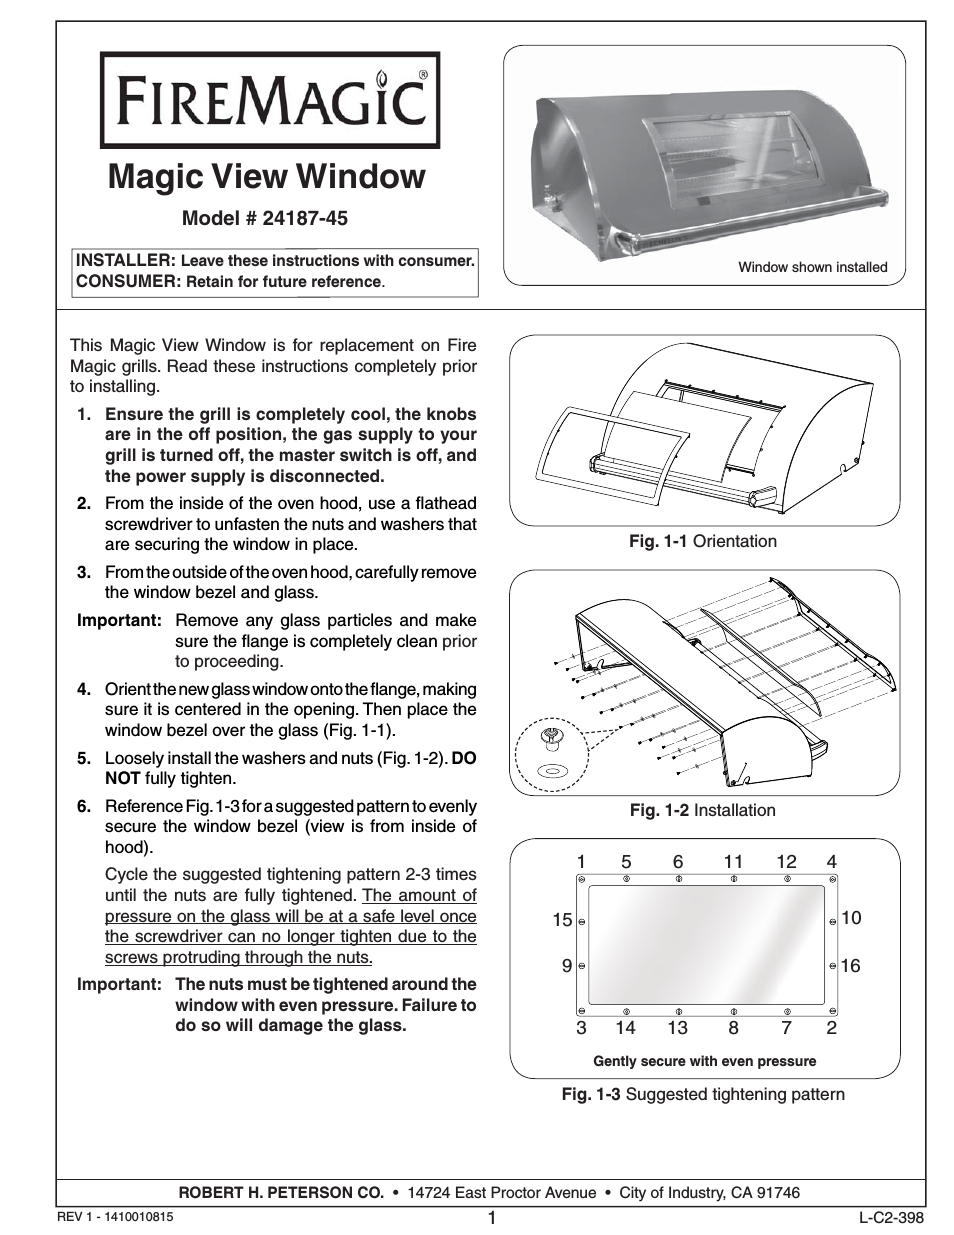 24187-45 Magic View Window Replacement